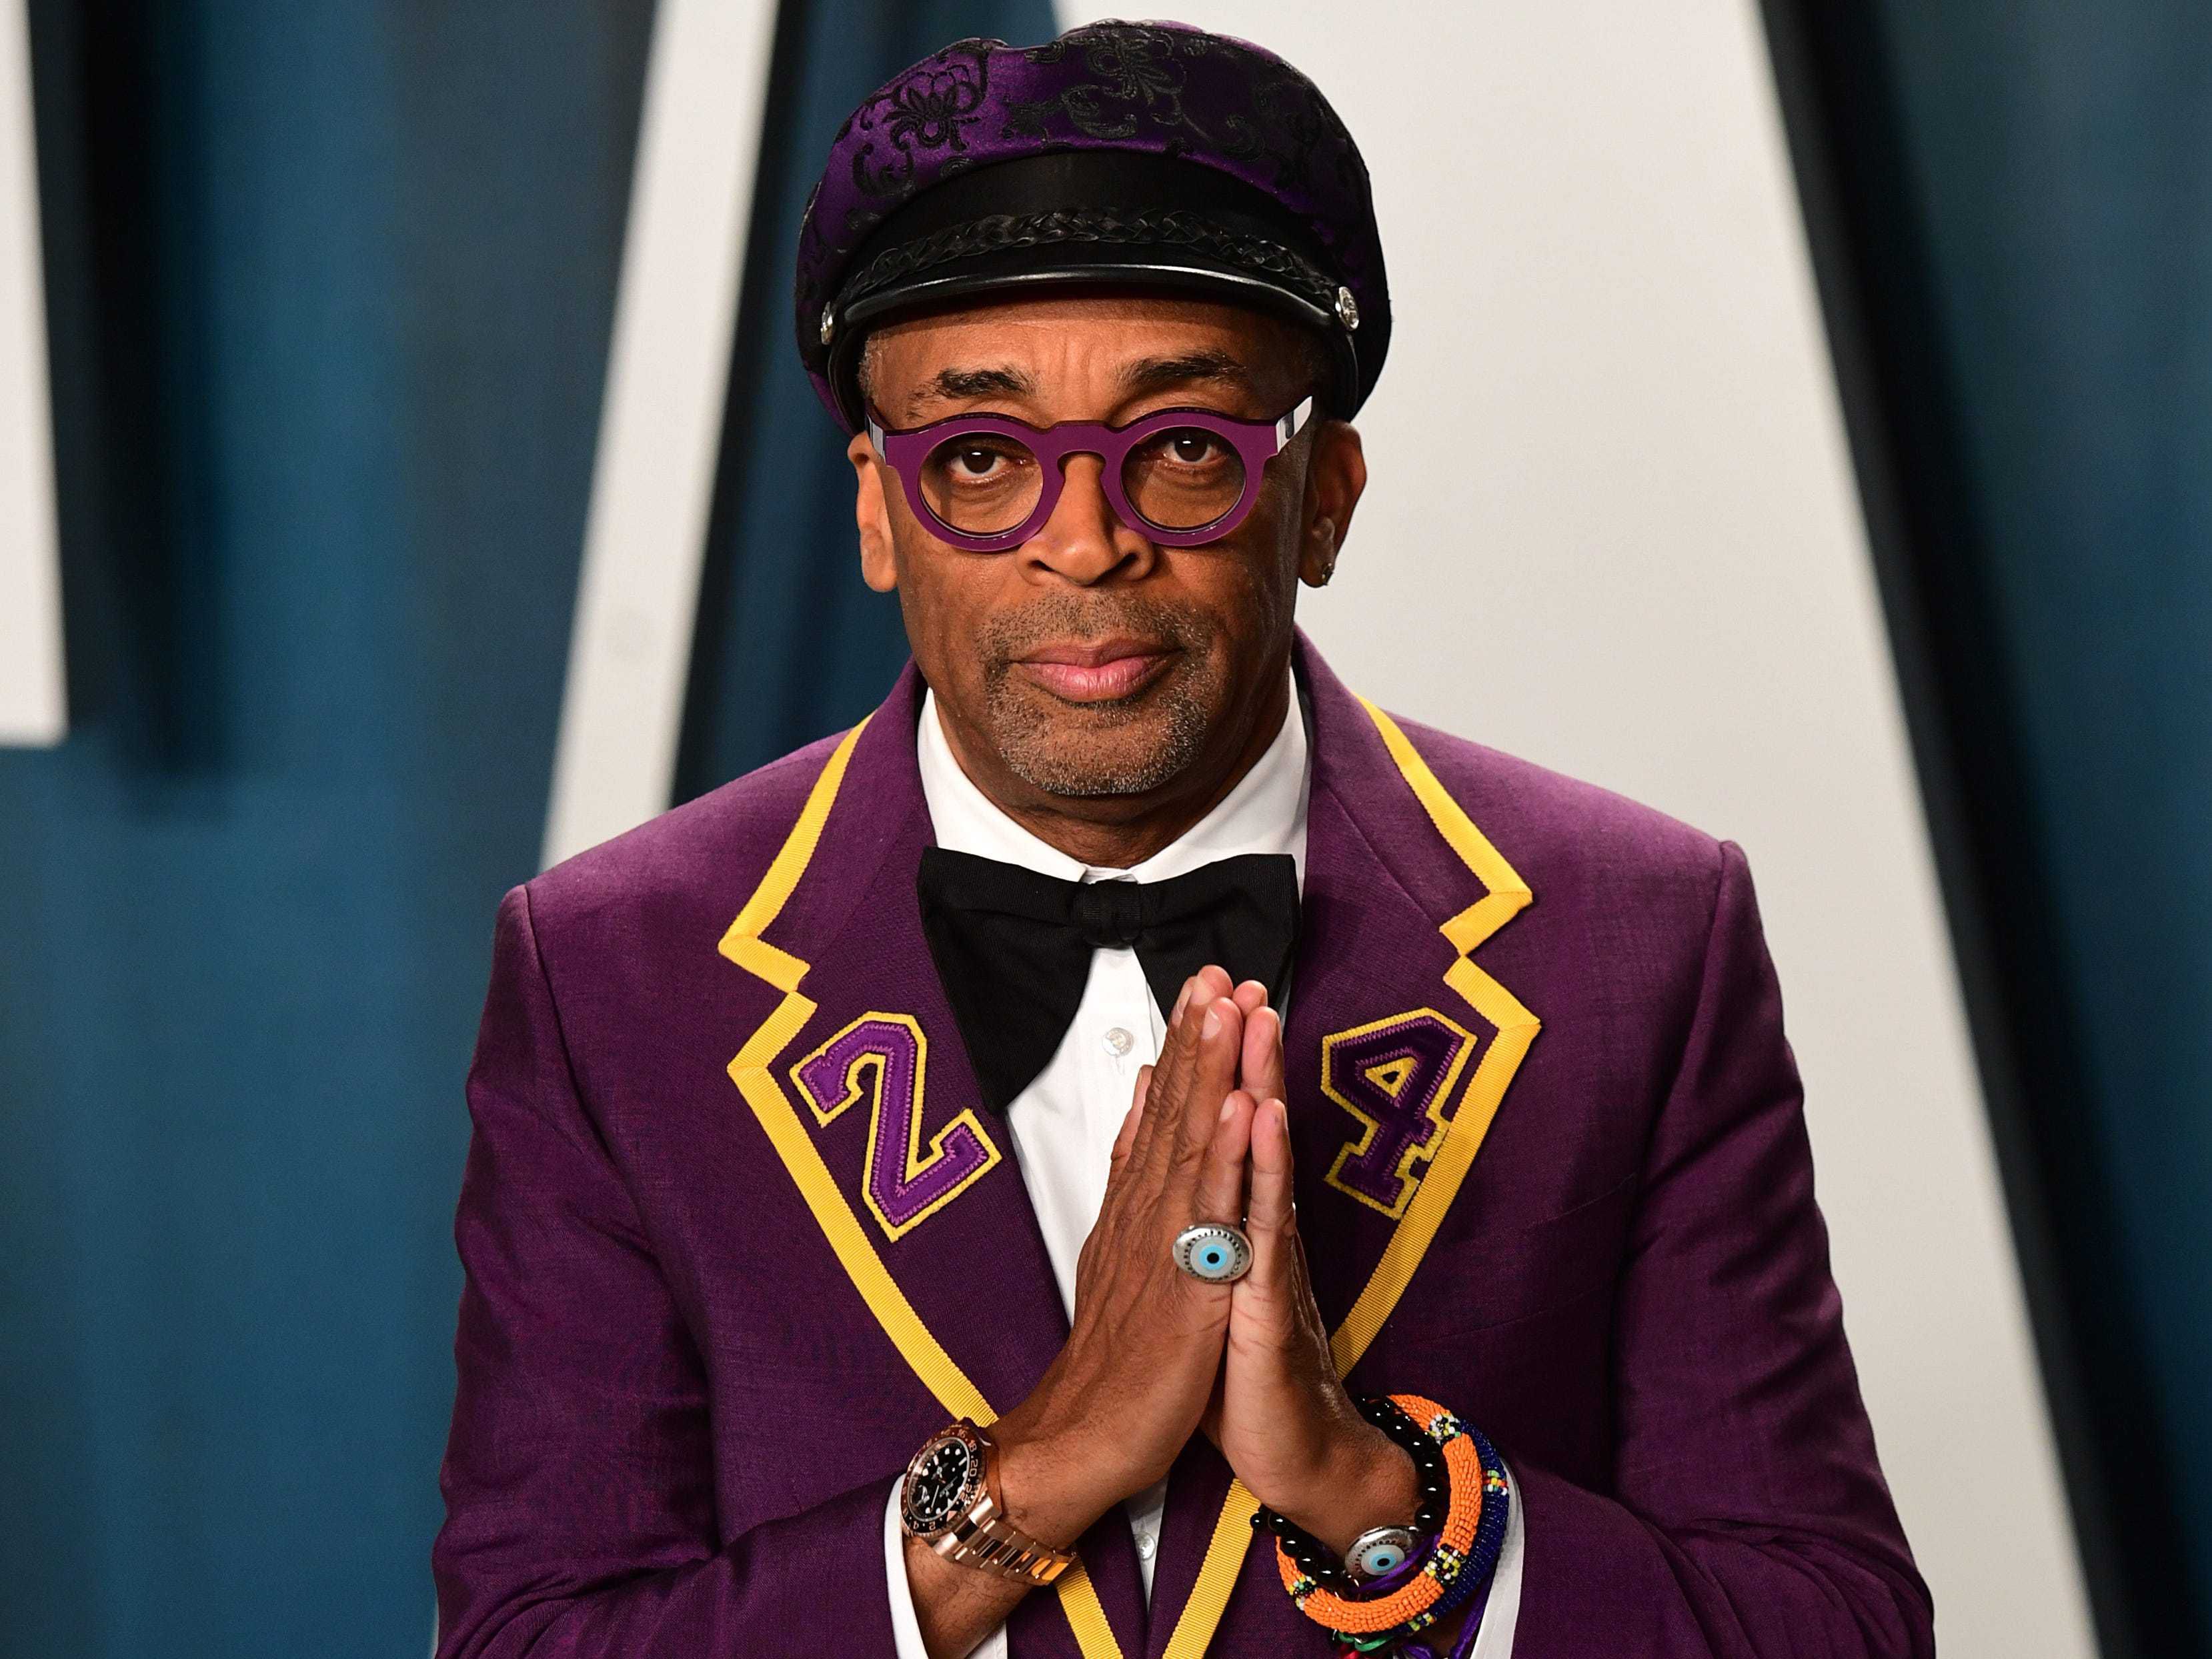 Air Jordans made for Spike Lee up for auction after being donated to shelter